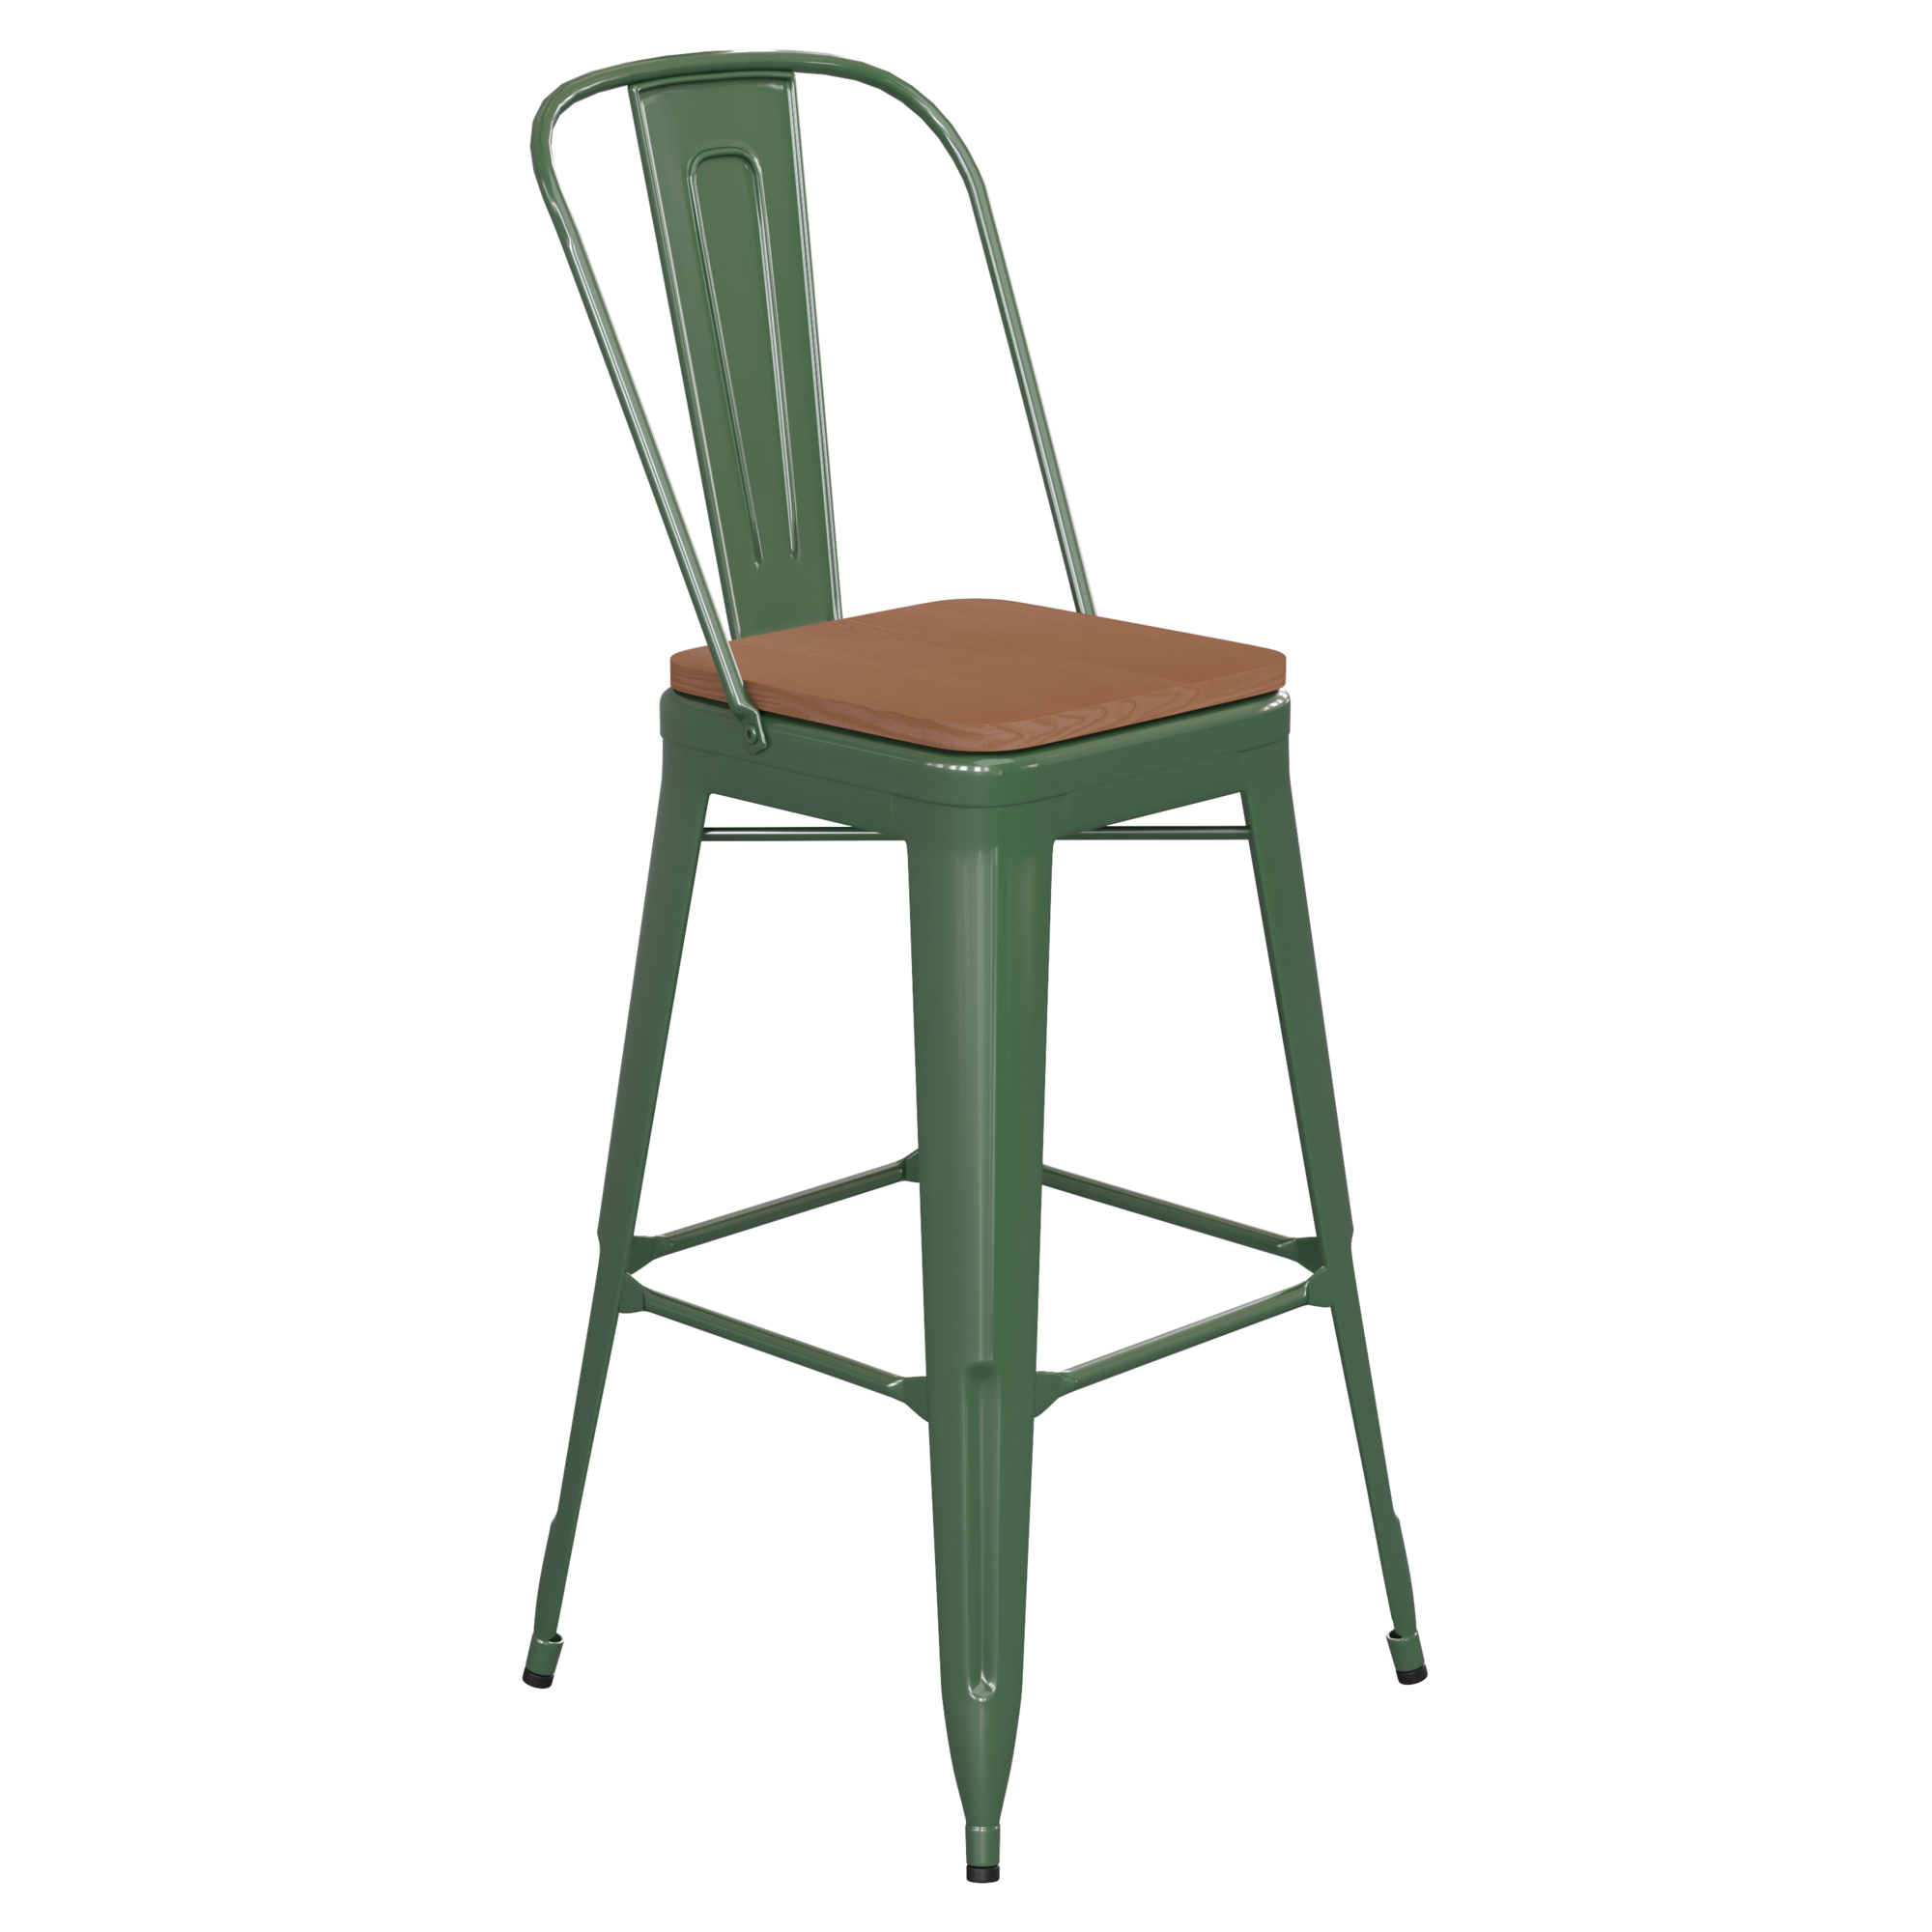 Flash Furniture, 30Inch Green Metal Counter Stool-Teak Poly Seat, Primary Color Green, Included (qty.) 1, Model CH3132030GGNP2T